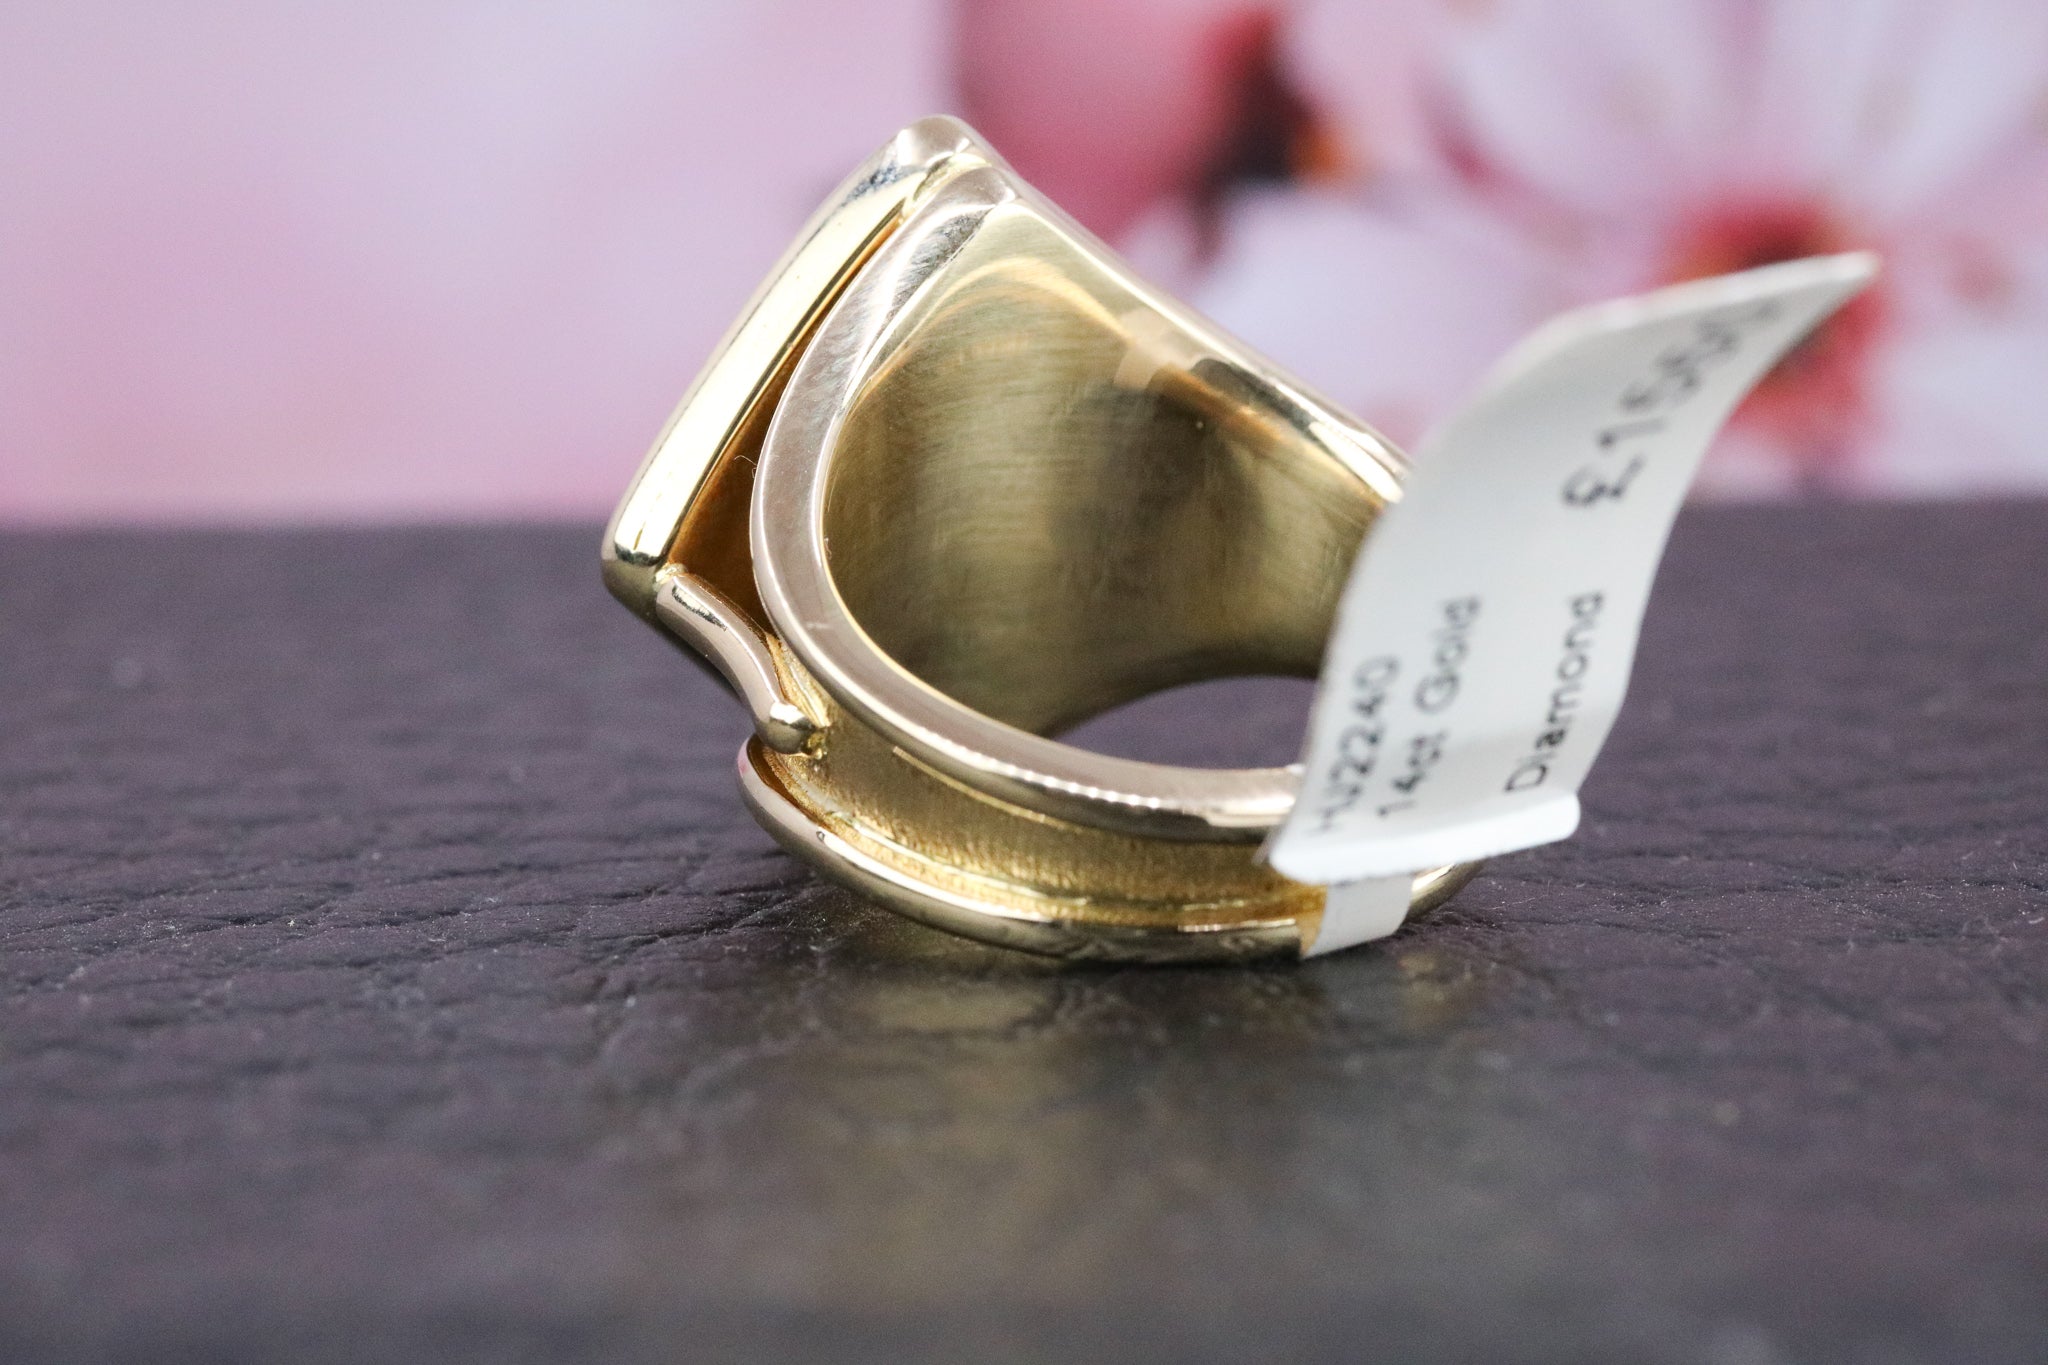 14ct Yellow Gold Diamond Ring - HJ2240 - Hallmark Jewellers Formby & The Jewellers Bench Widnes